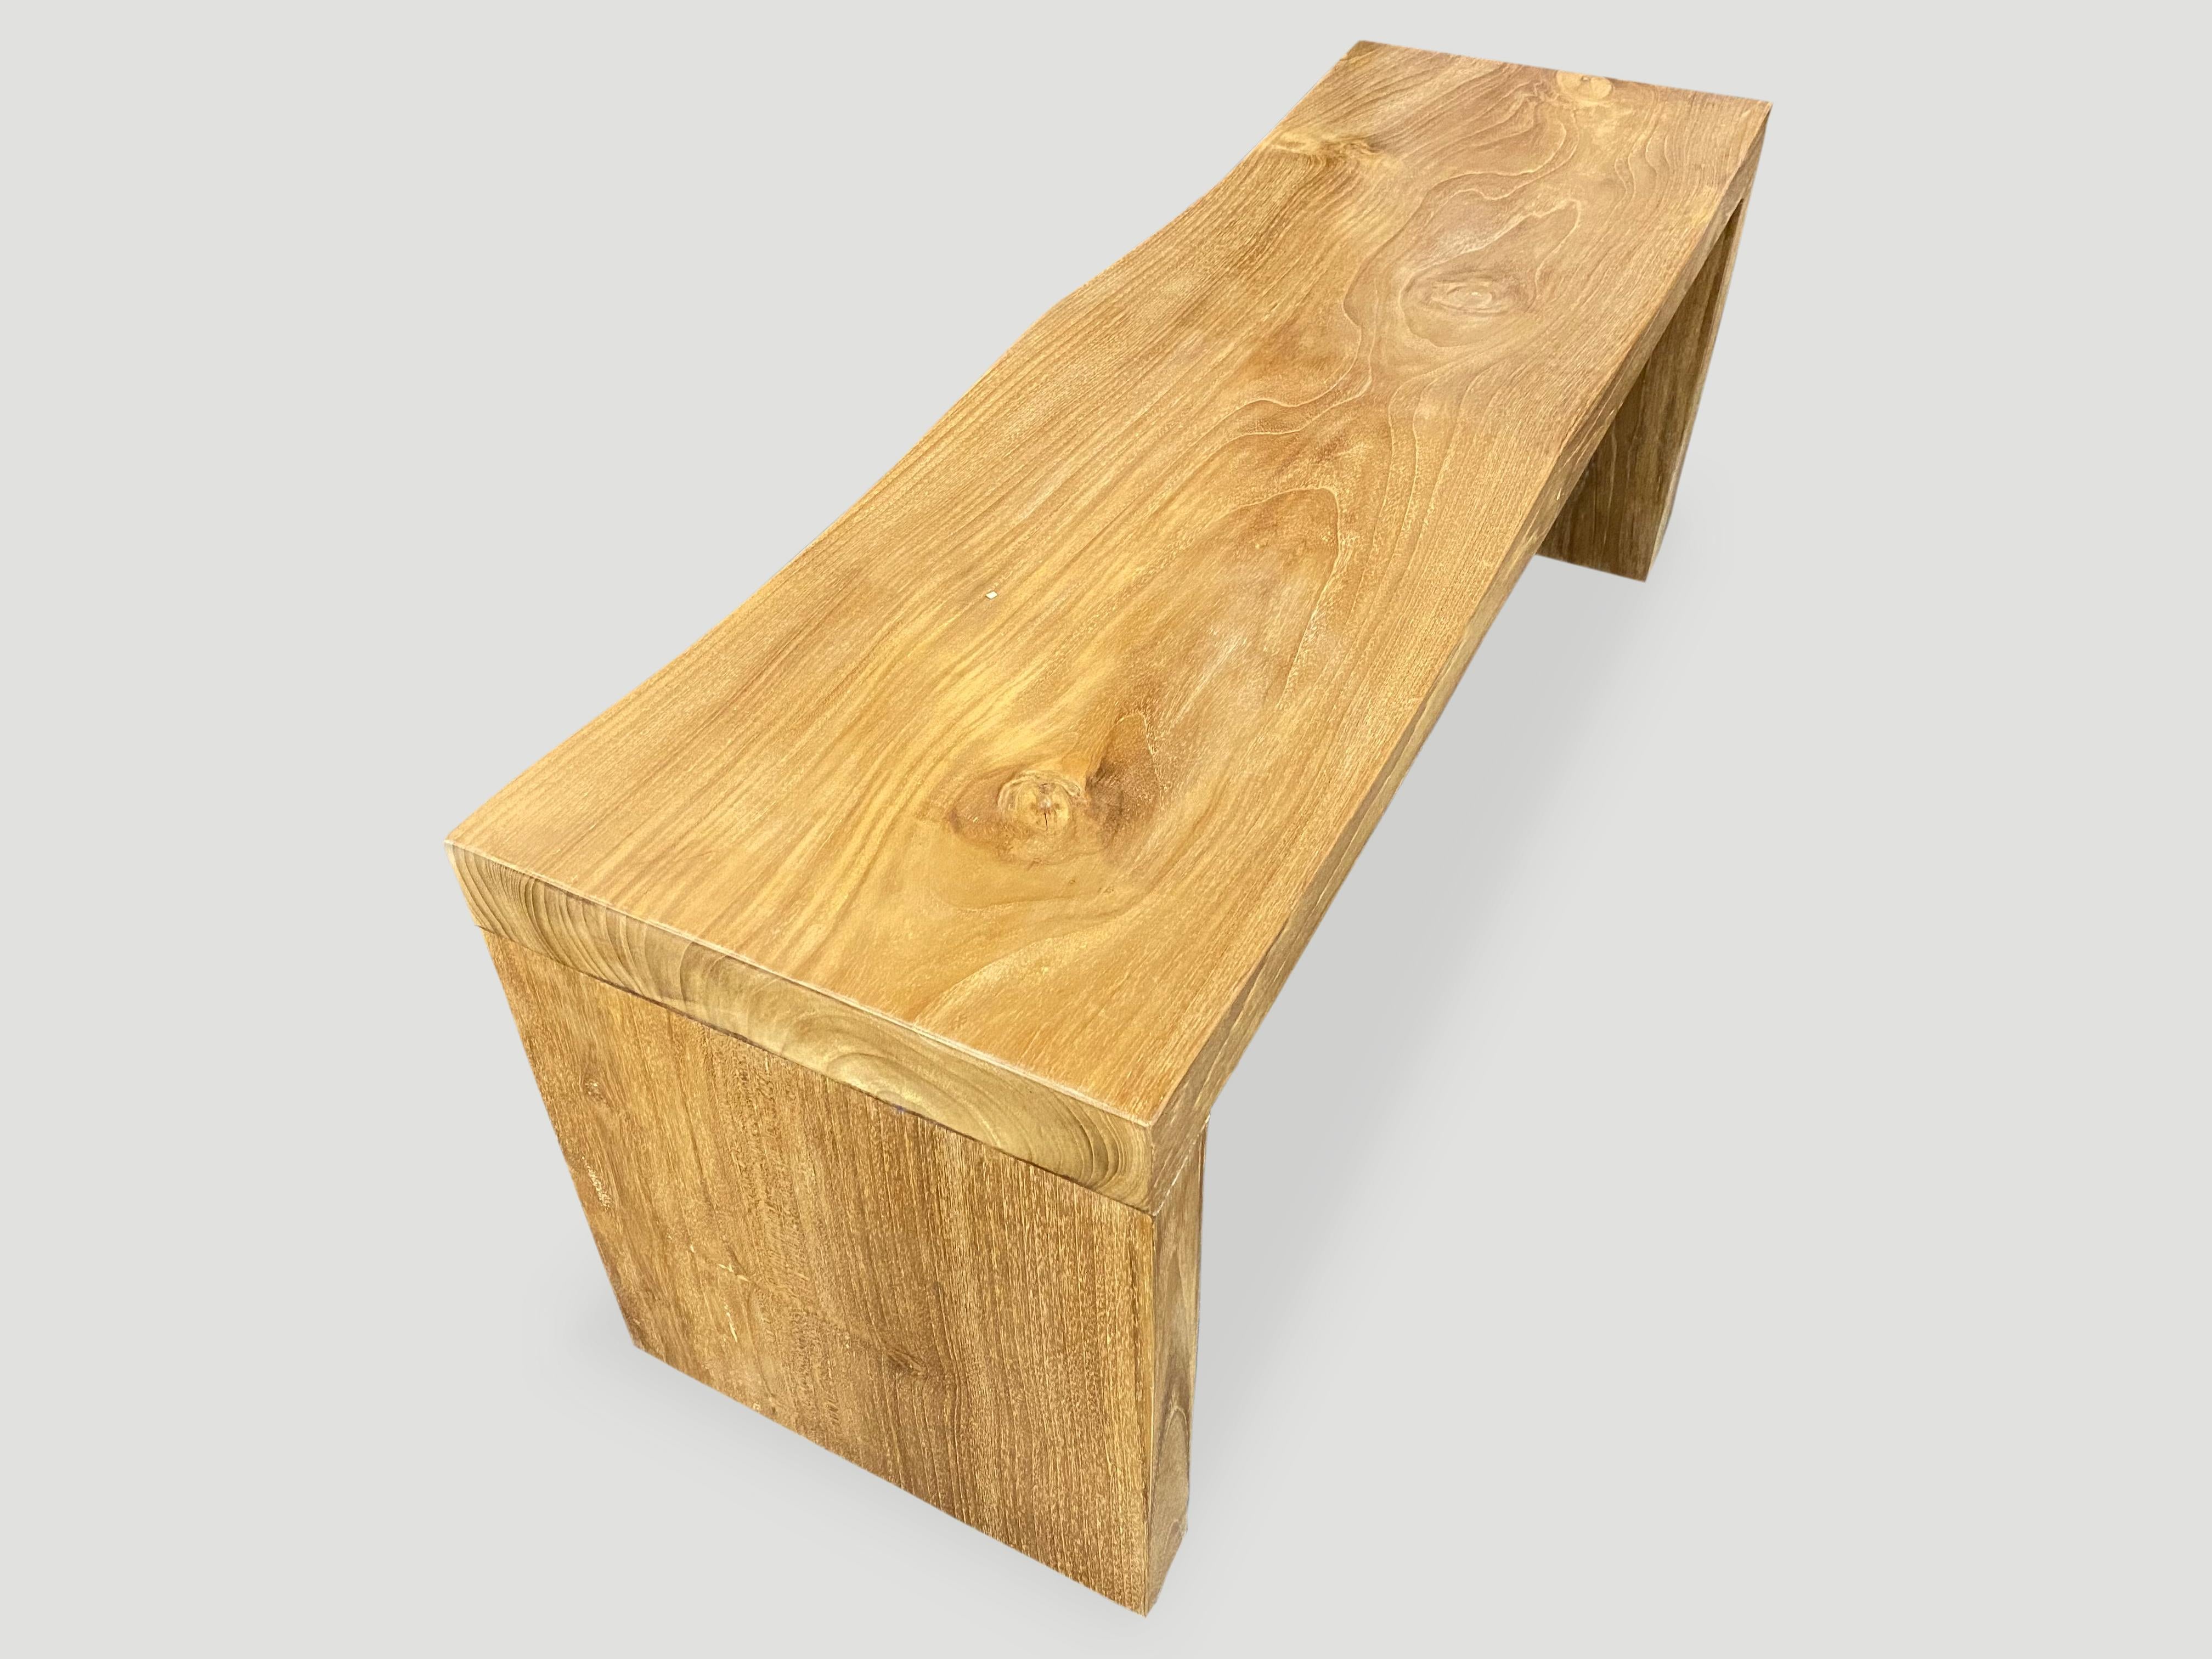 The teak wave bench represents a sleek, modern aesthetic, designed to provide comfort and durability. A solid single slab of reclaimed teak wood is hand carved into a wave design, sanded and sealed with a natural oil finish. Our modern wave bench